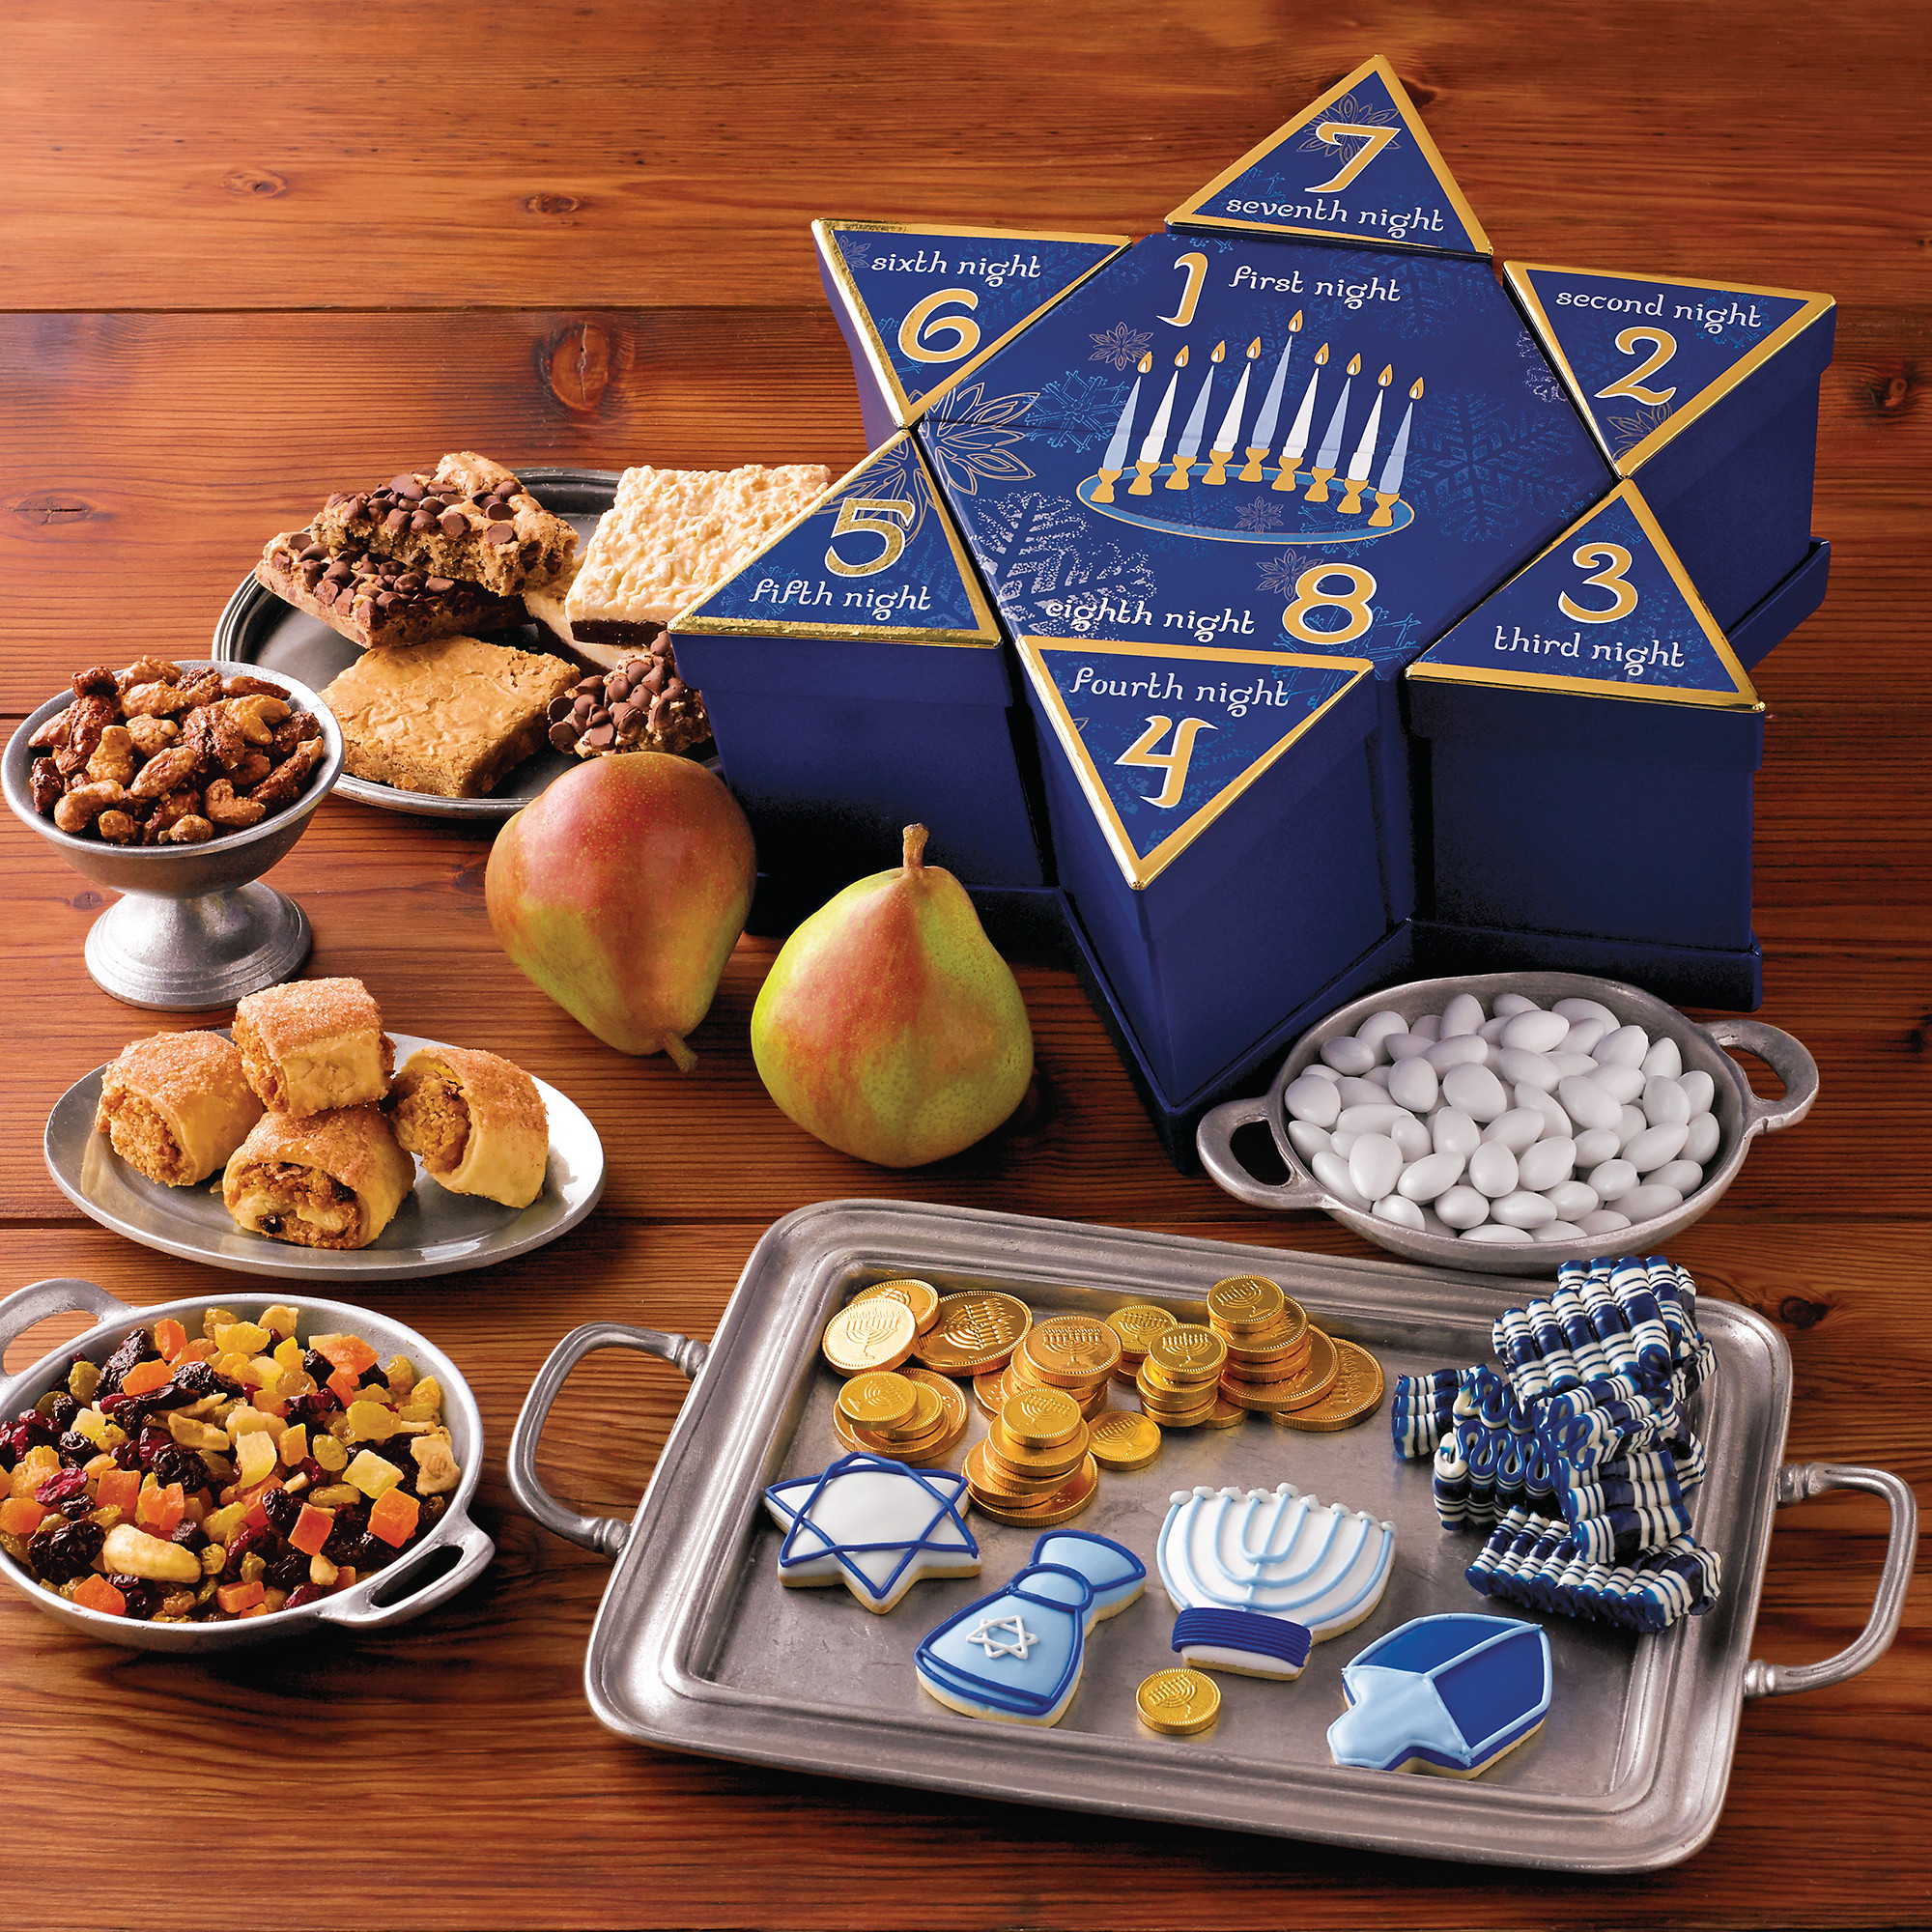 Hanukkah Food Gifts
 21 Best Hanukkah Food Gifts Best Round Up Recipe Collections